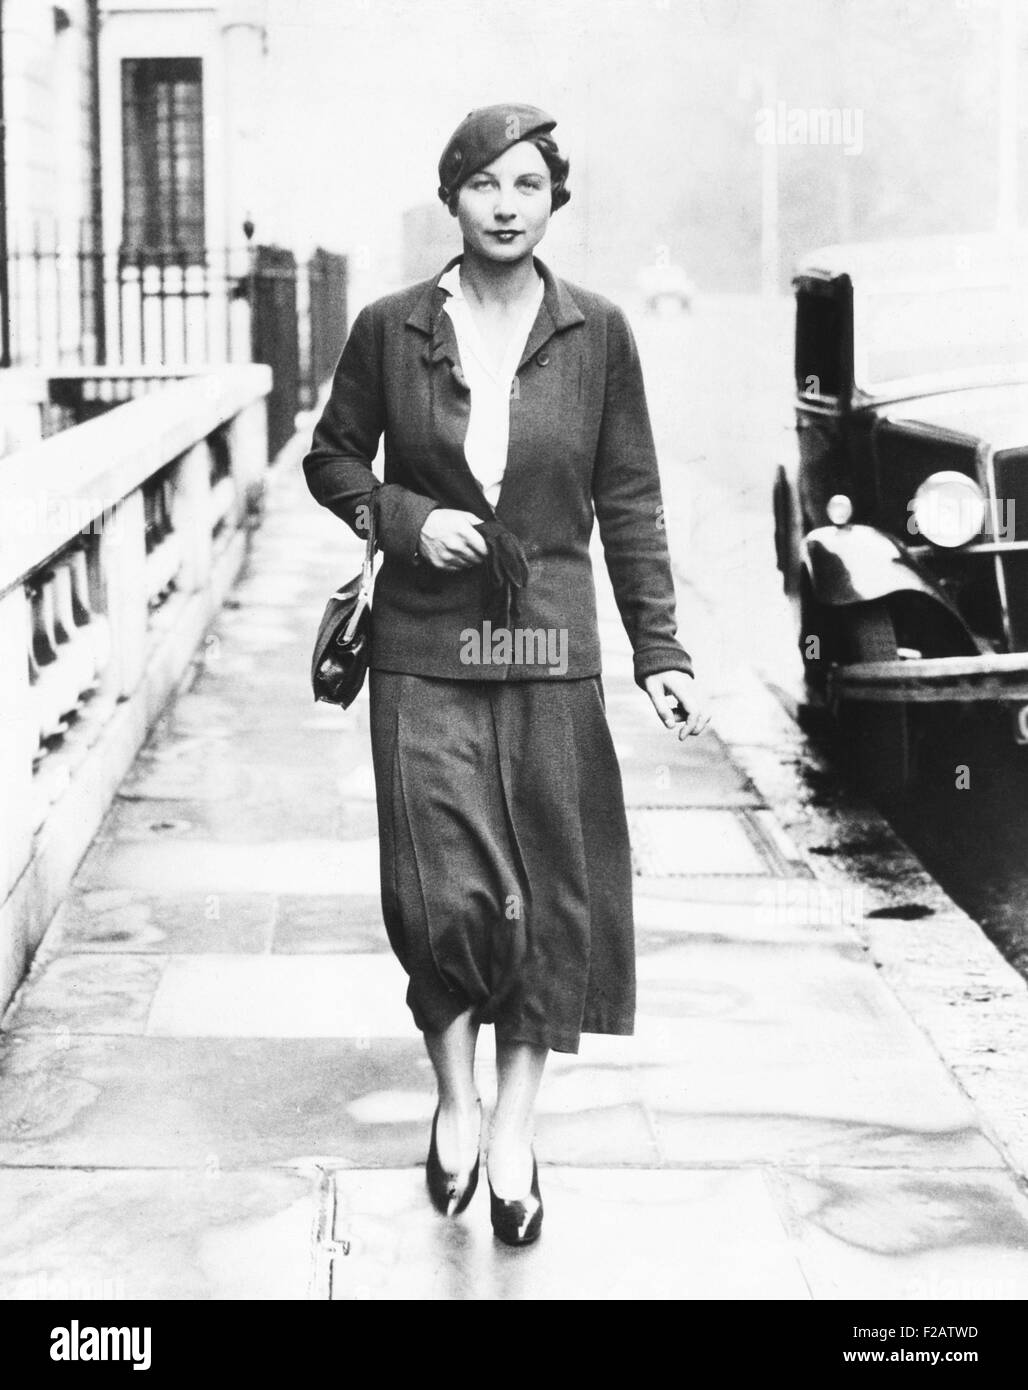 Helen Wills Moody in London to defend her title at the Wimbledon Tennis Championships. June 3, 1933. She is attired in a relaxed green outfit with a matching beret. (CSU 2015 11 1584) Stock Photo